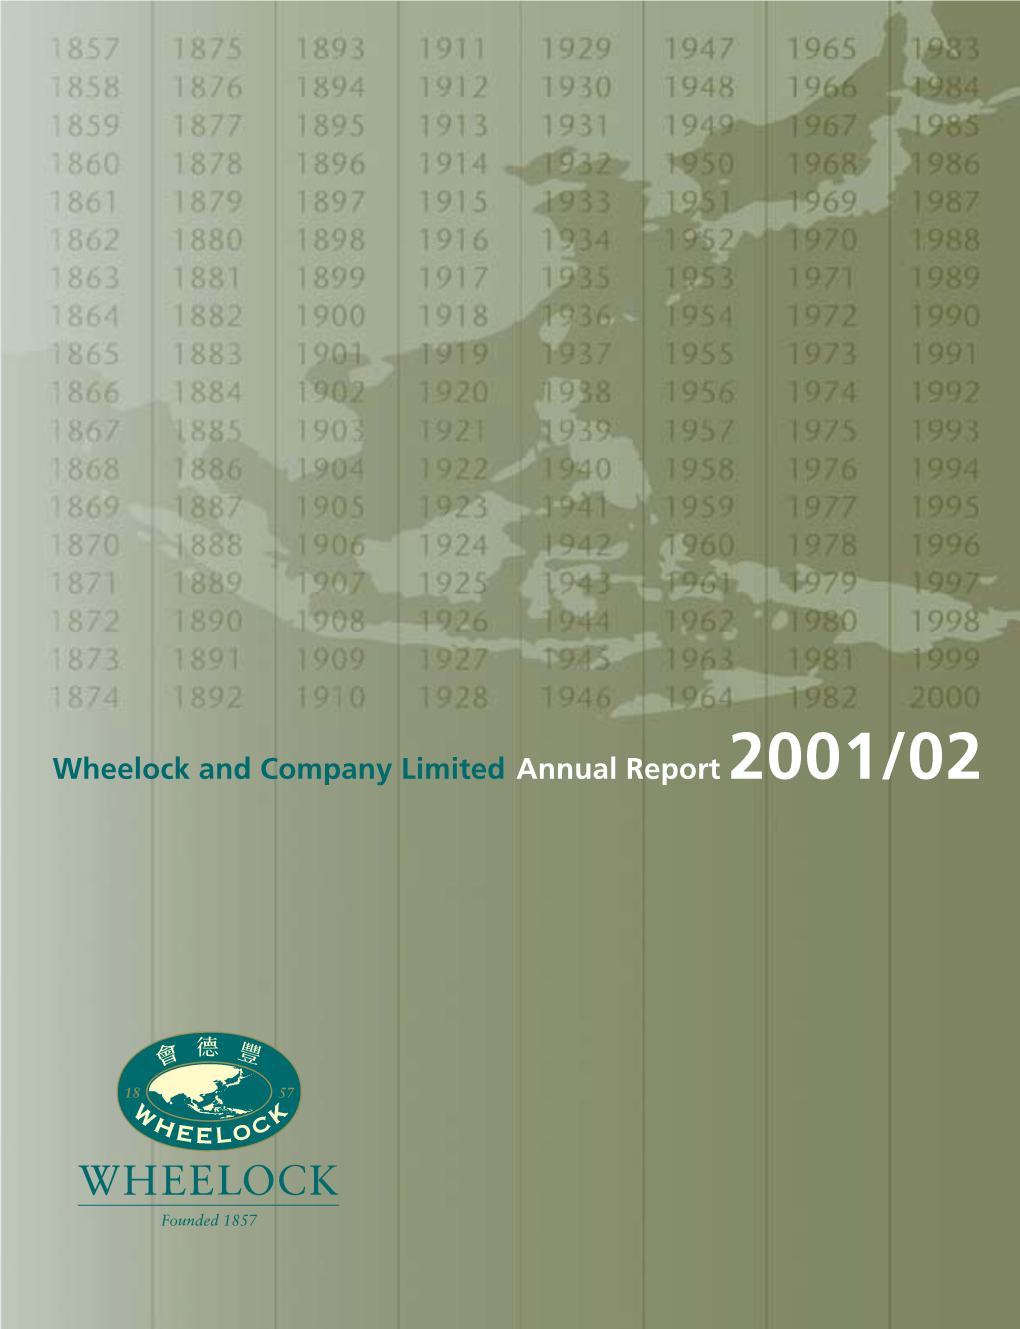 Wheelock and Company Limited Annual Report 2001/02